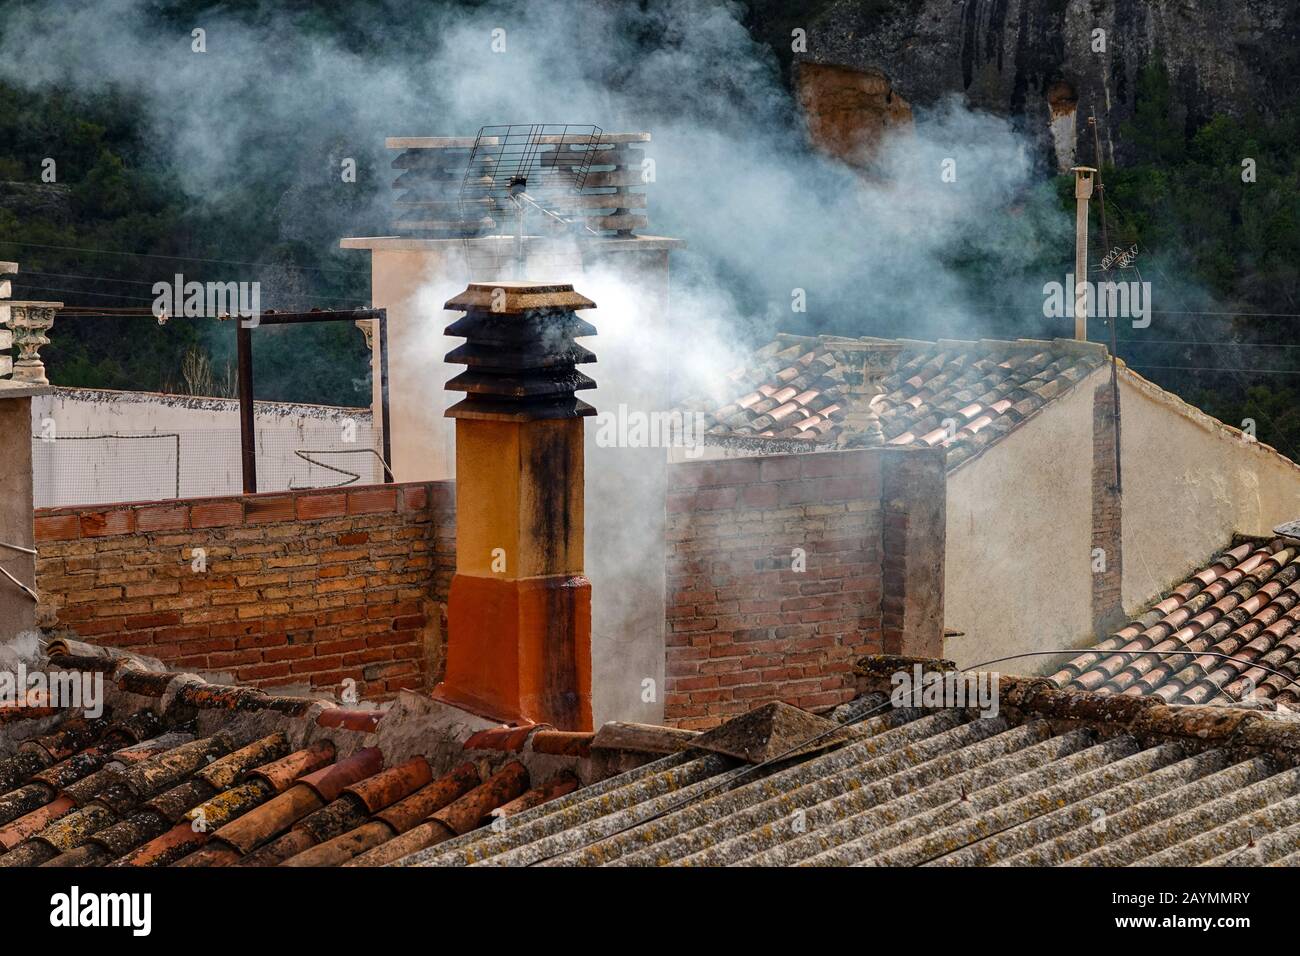 Pollutions from smokey chimney from burning wood at Margalef, Catalunya, Spain Stock Photo